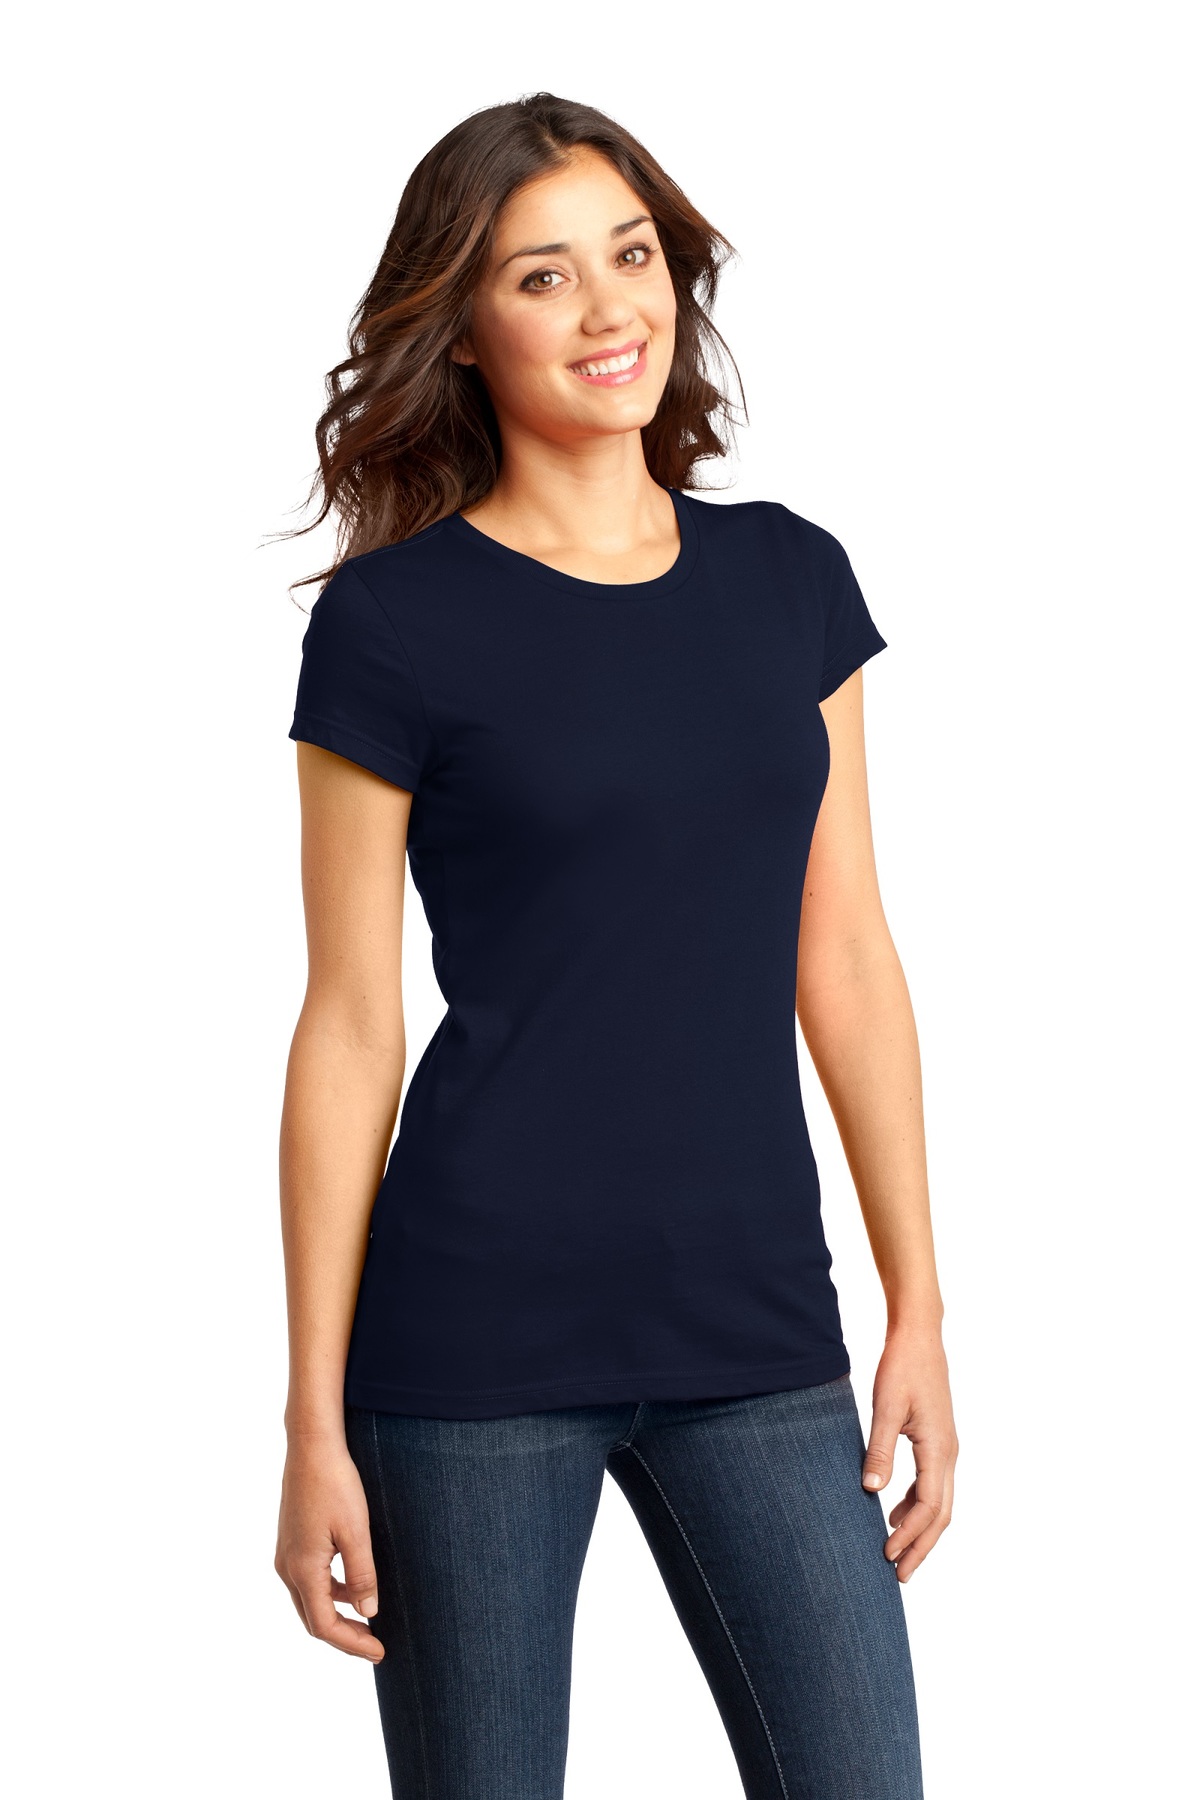 District Embroidered Women's Fitted Very Important Tee - Queensboro